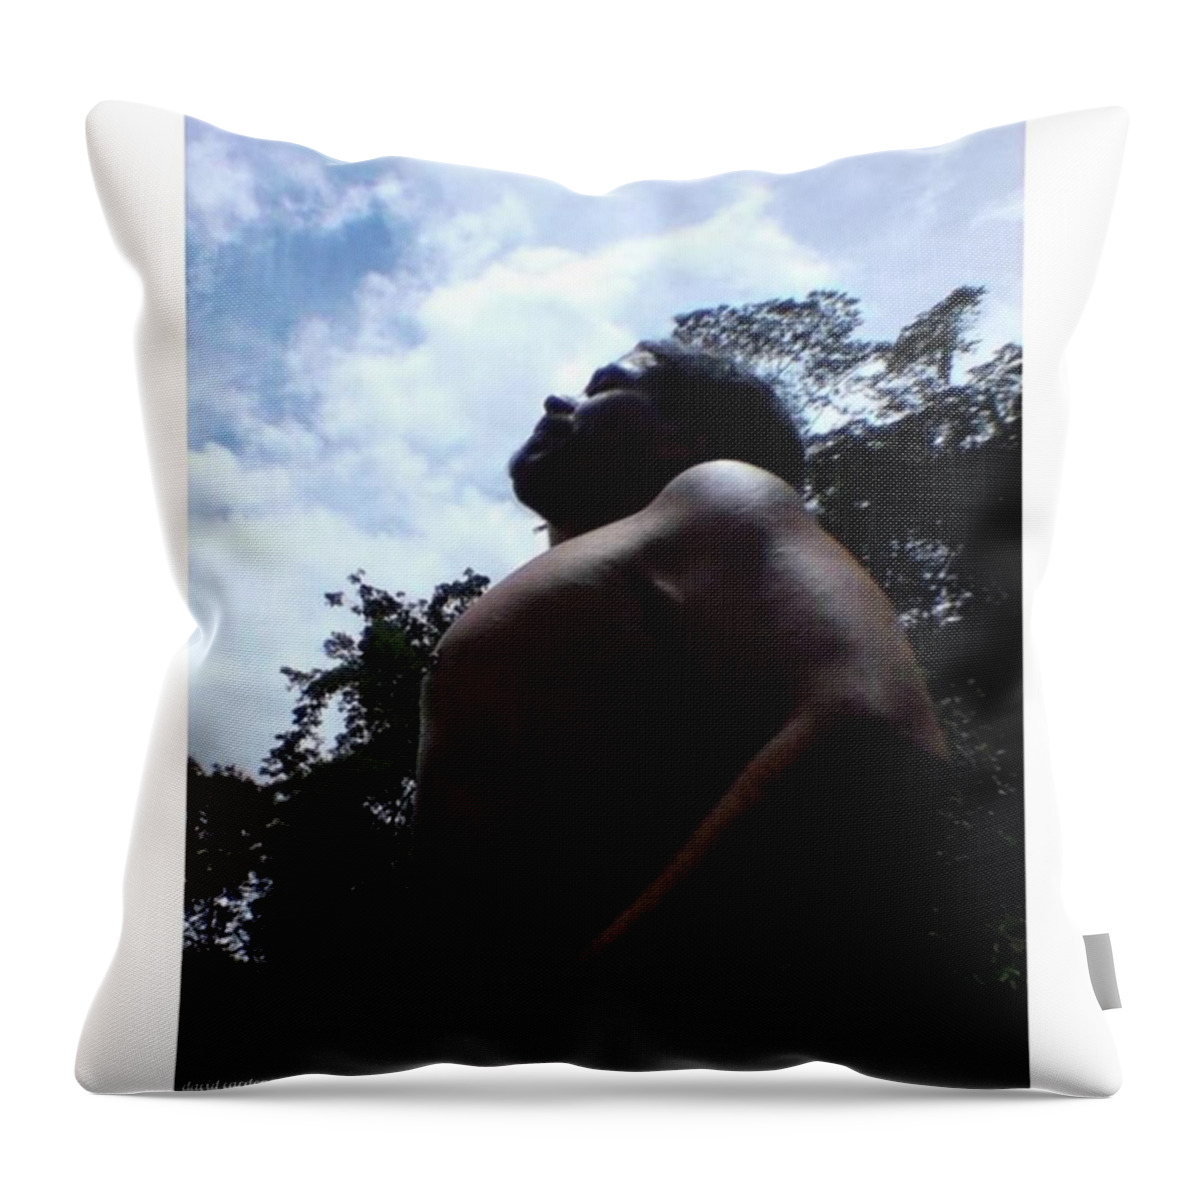 Body Throw Pillow featuring the photograph Heart, Soul And by David Cardona